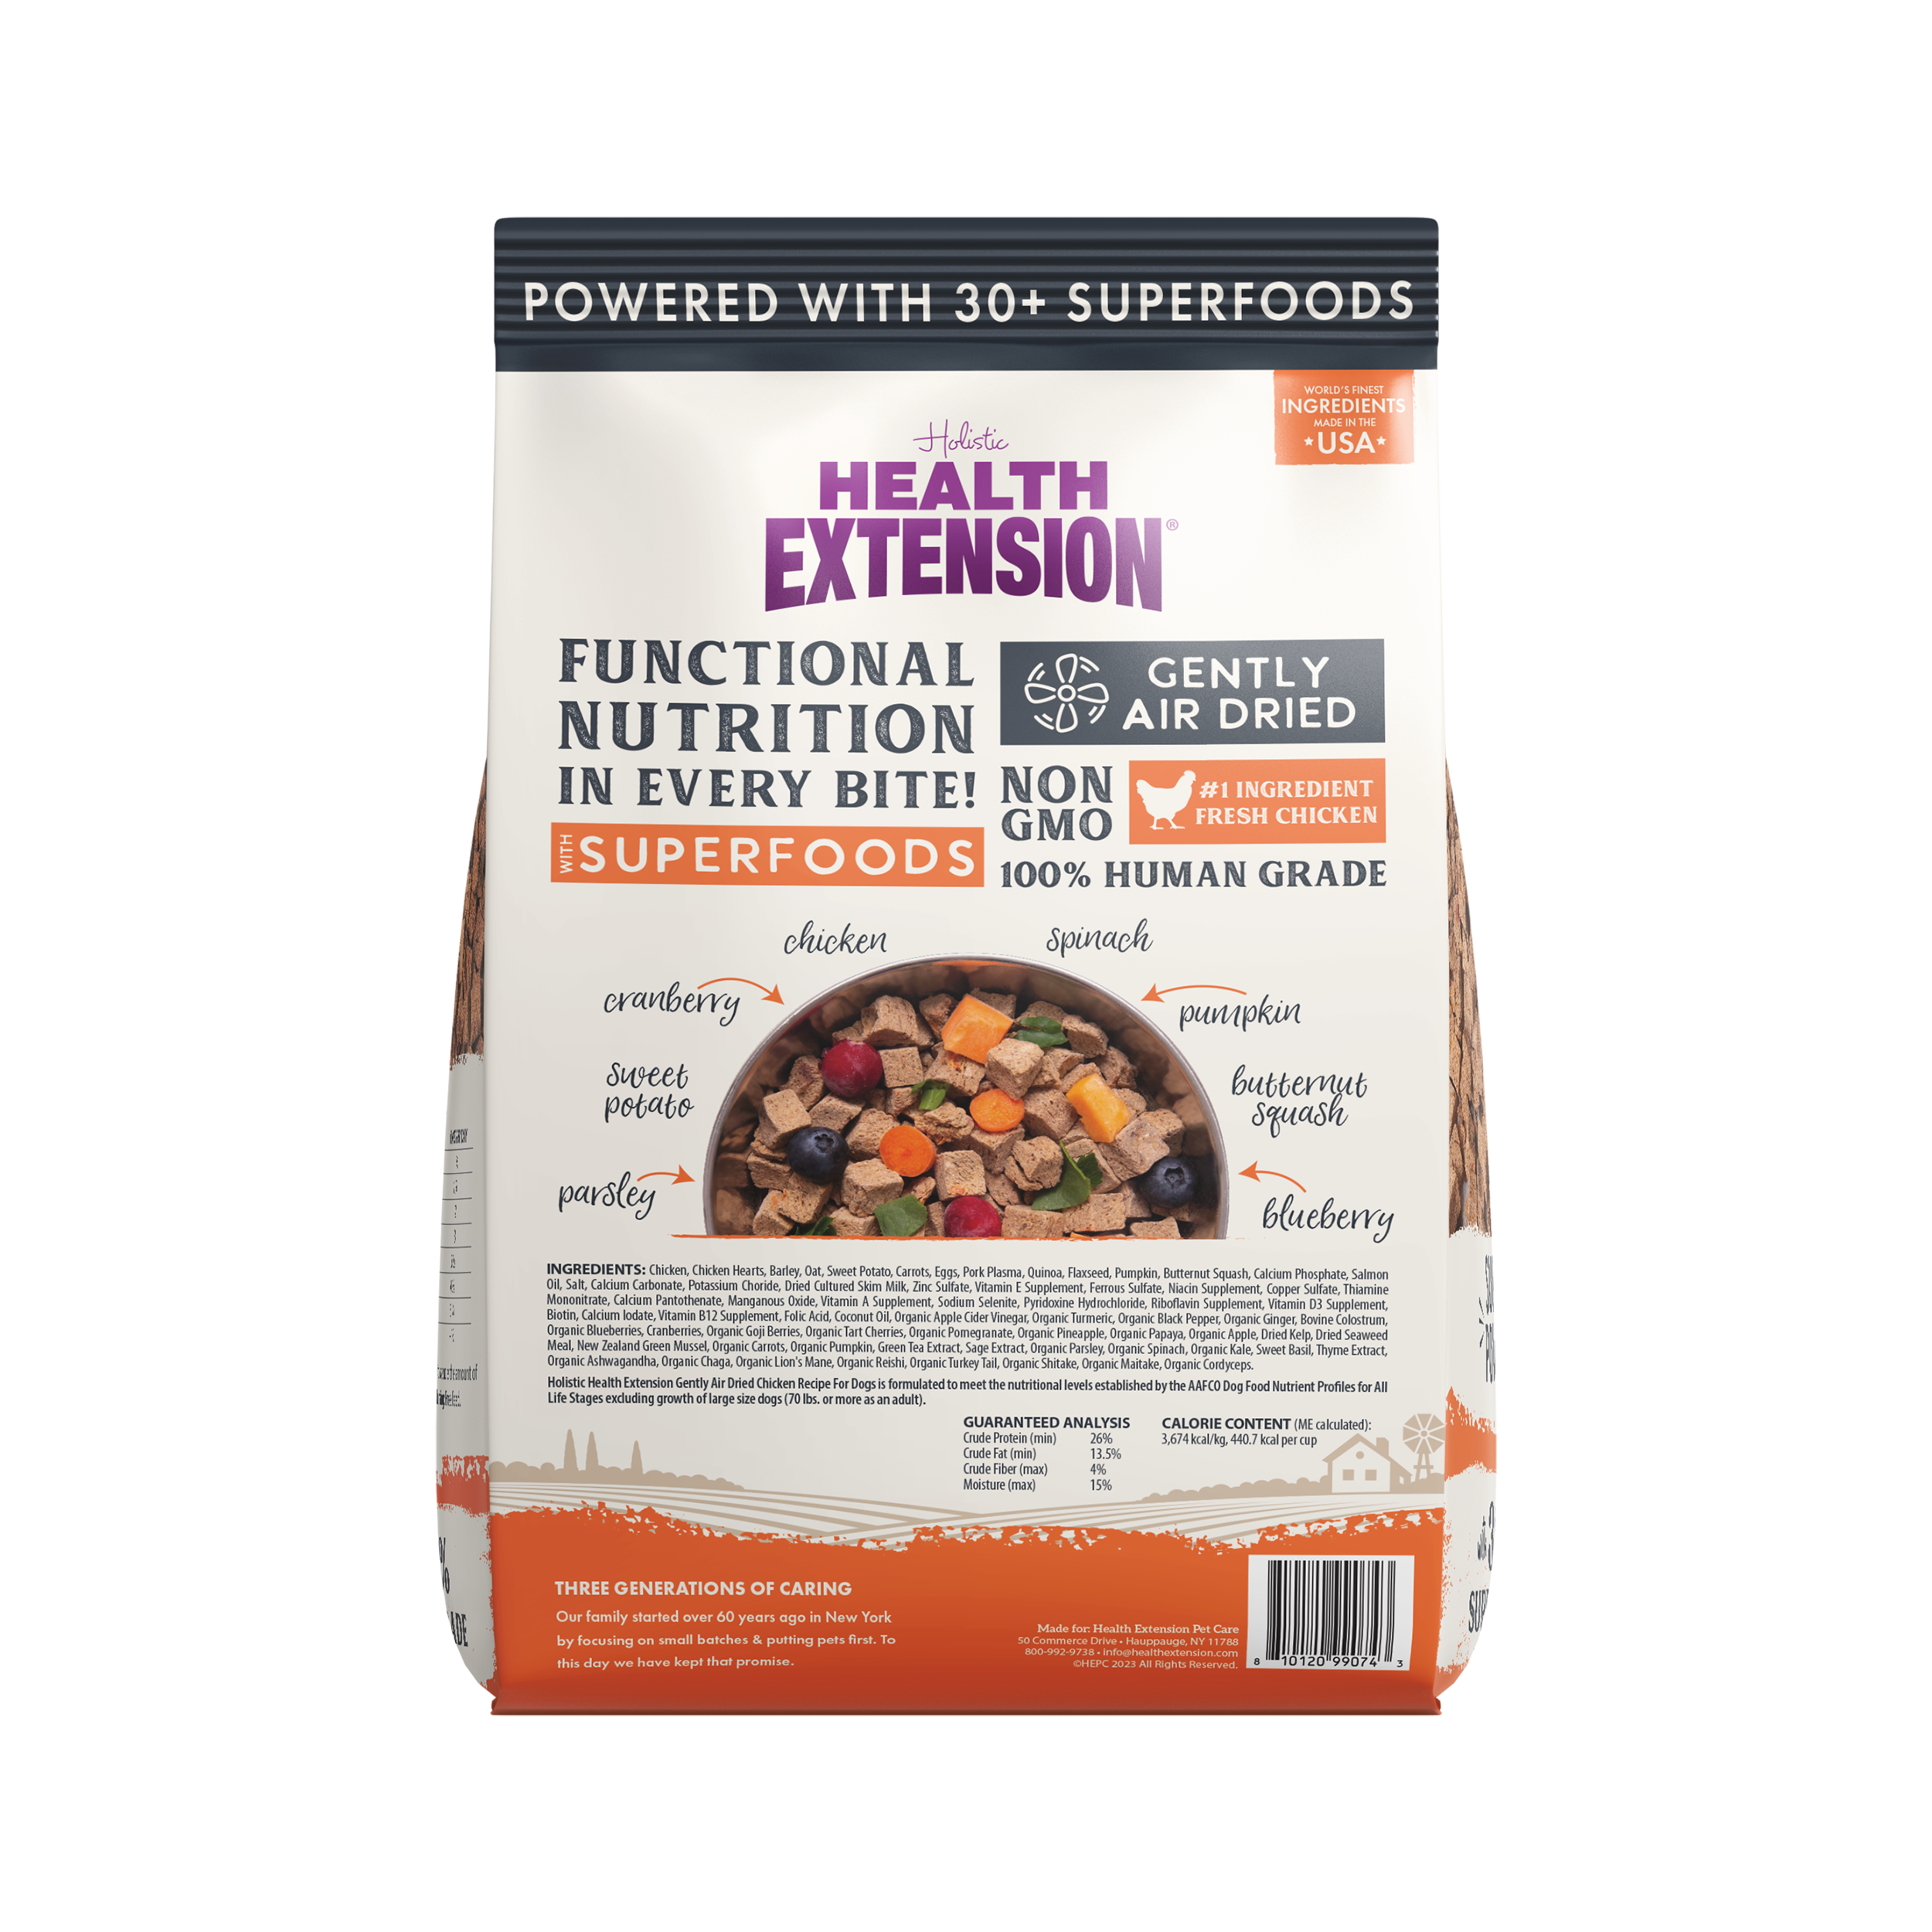 Back view of the Packaging of Health Extension Air Dried dog food featuring 30+ superfoods, Non-GMO, 100% Human Grade with key ingredients like chicken and cranberries highlighted, and a nod to the brand's family-owned, three-generation legacy.